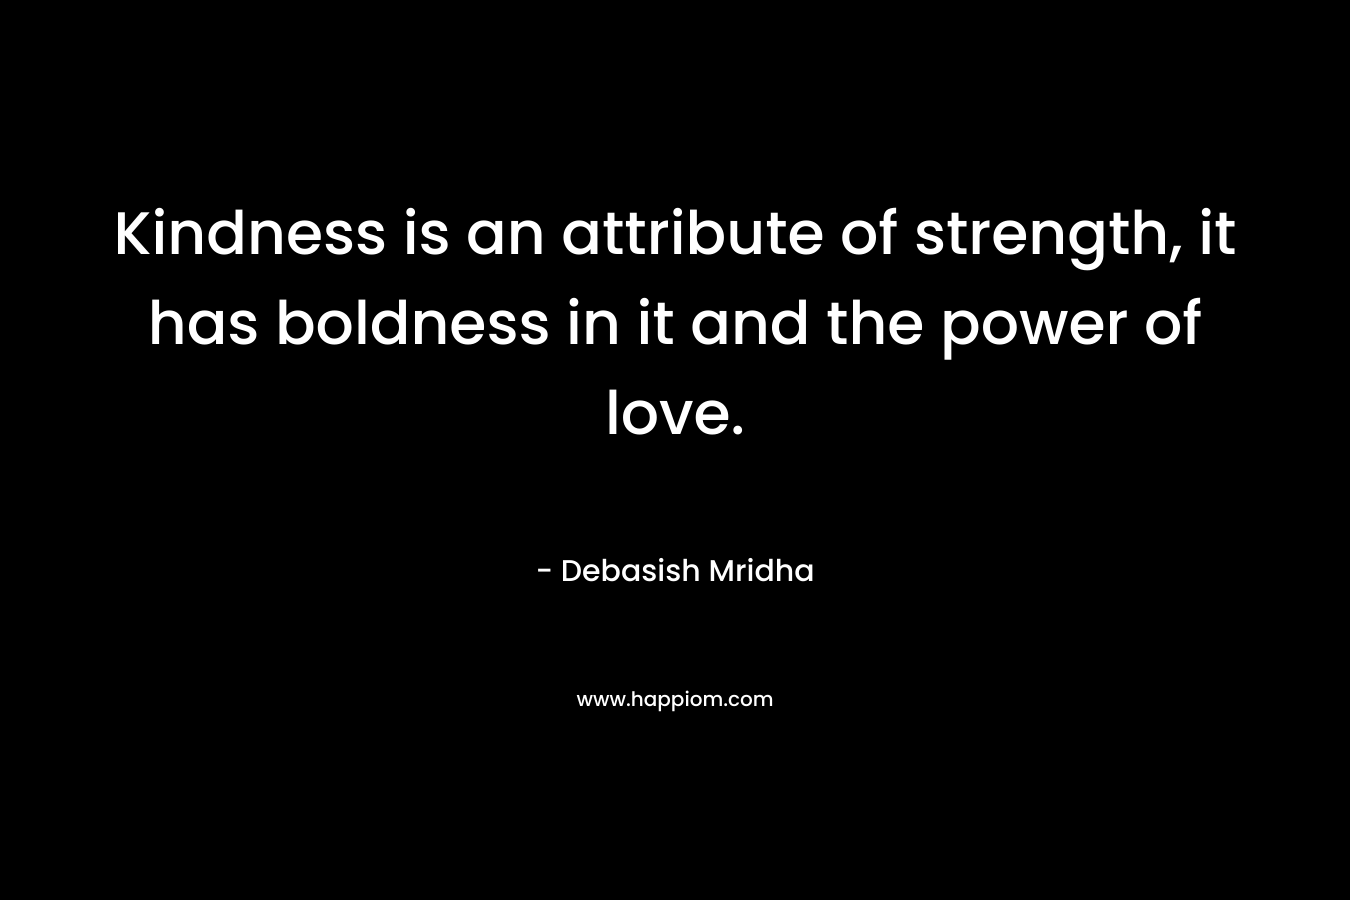 Kindness is an attribute of strength, it has boldness in it and the power of love.